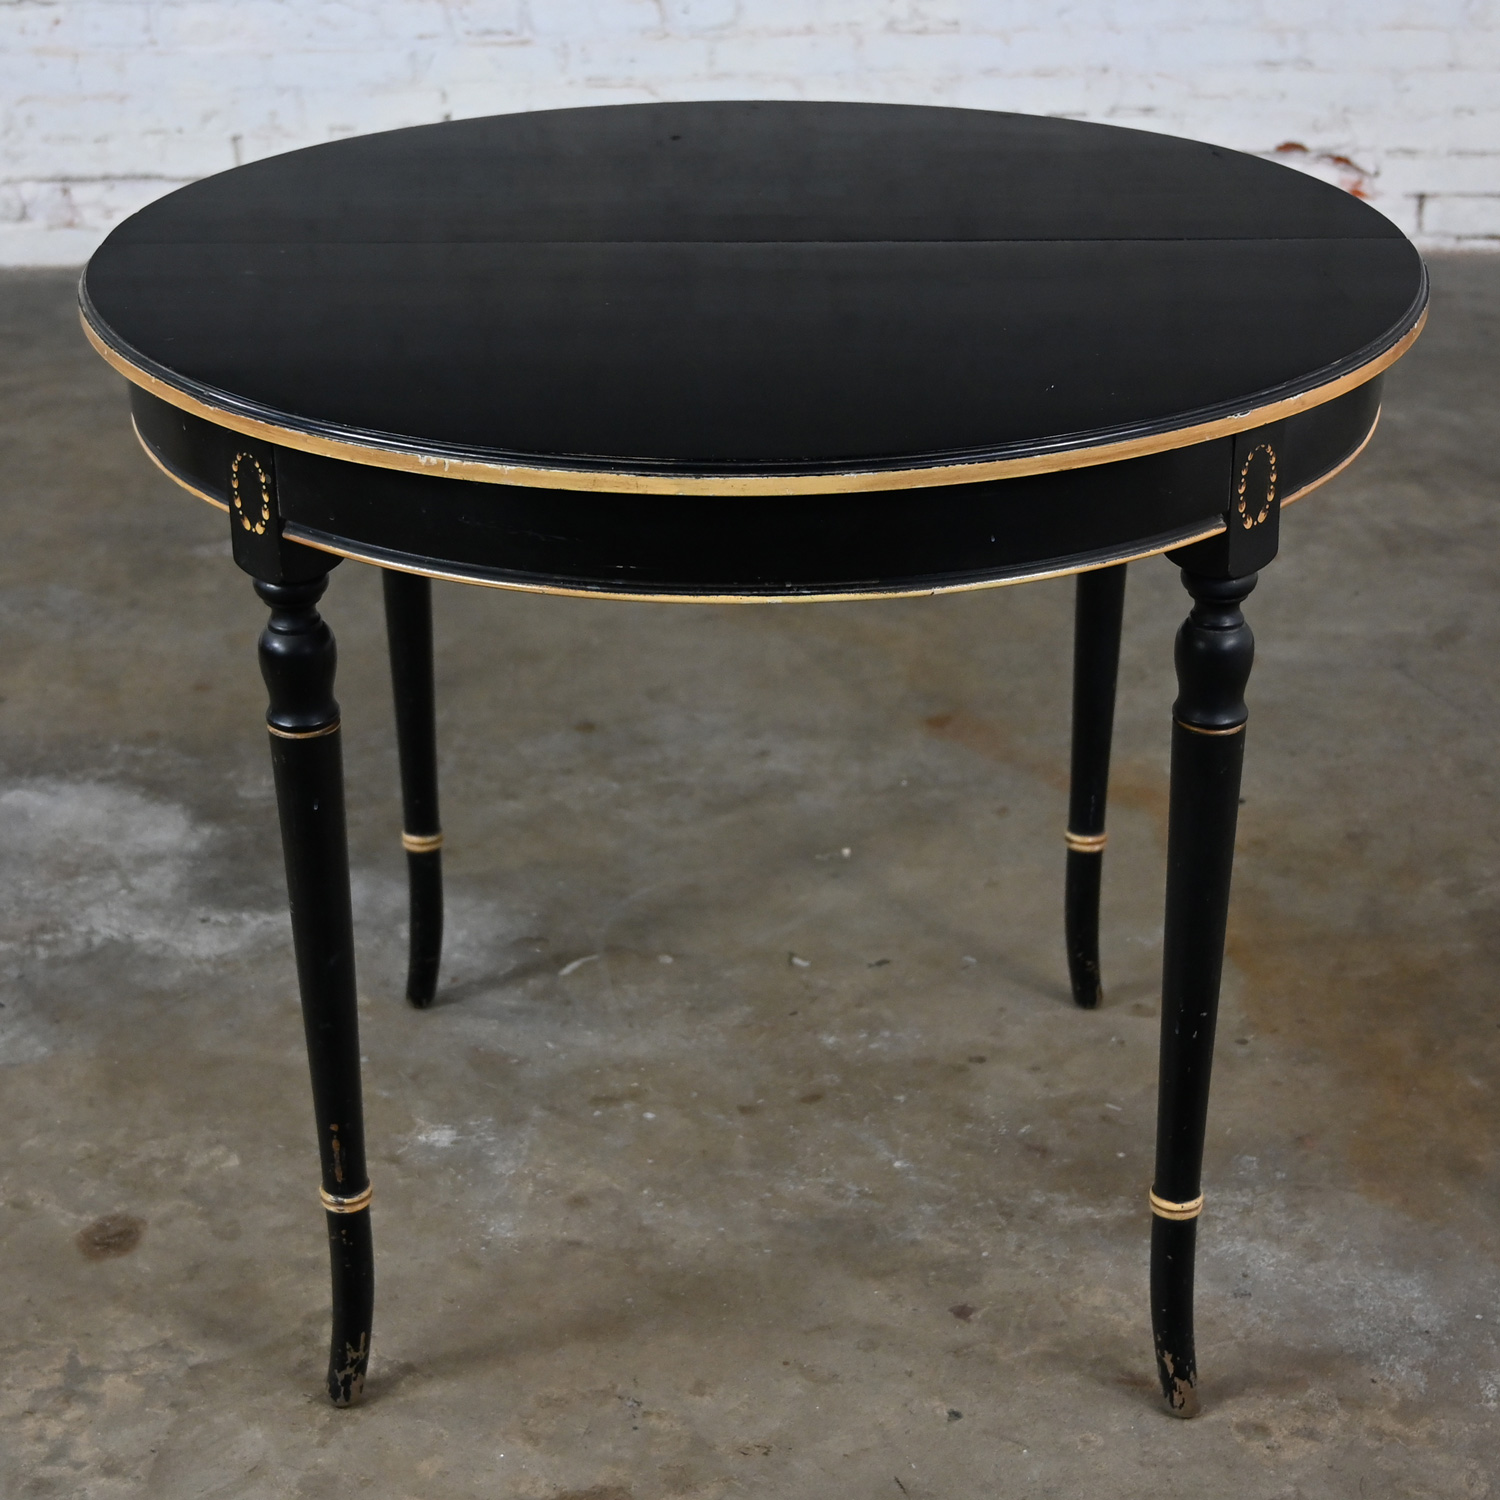 Early 20th Century Neoclassical Round Dining Table or Center Table Black Age-Distressed Finish & Gold Detail